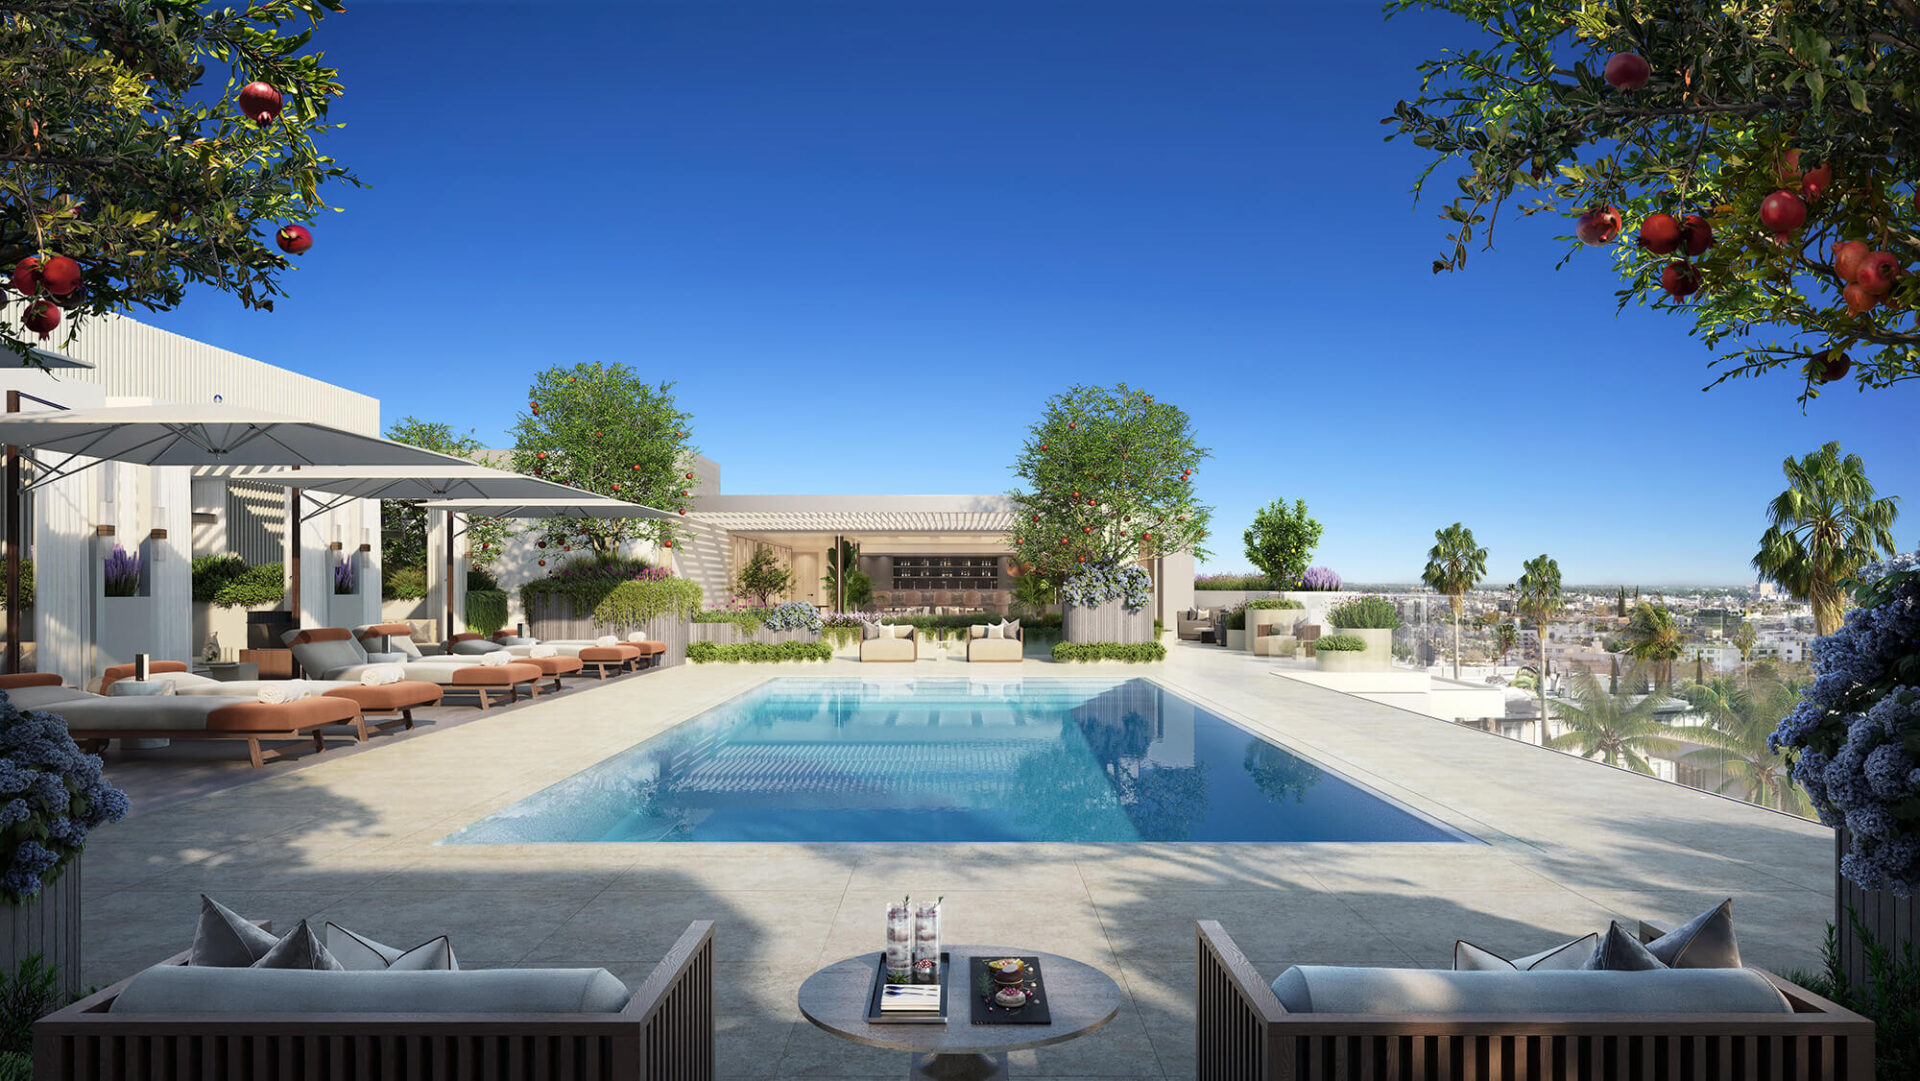 mandarin oriental beverly hills rendering of a shared outdoor space with a pool. lounge chairs and a cabana